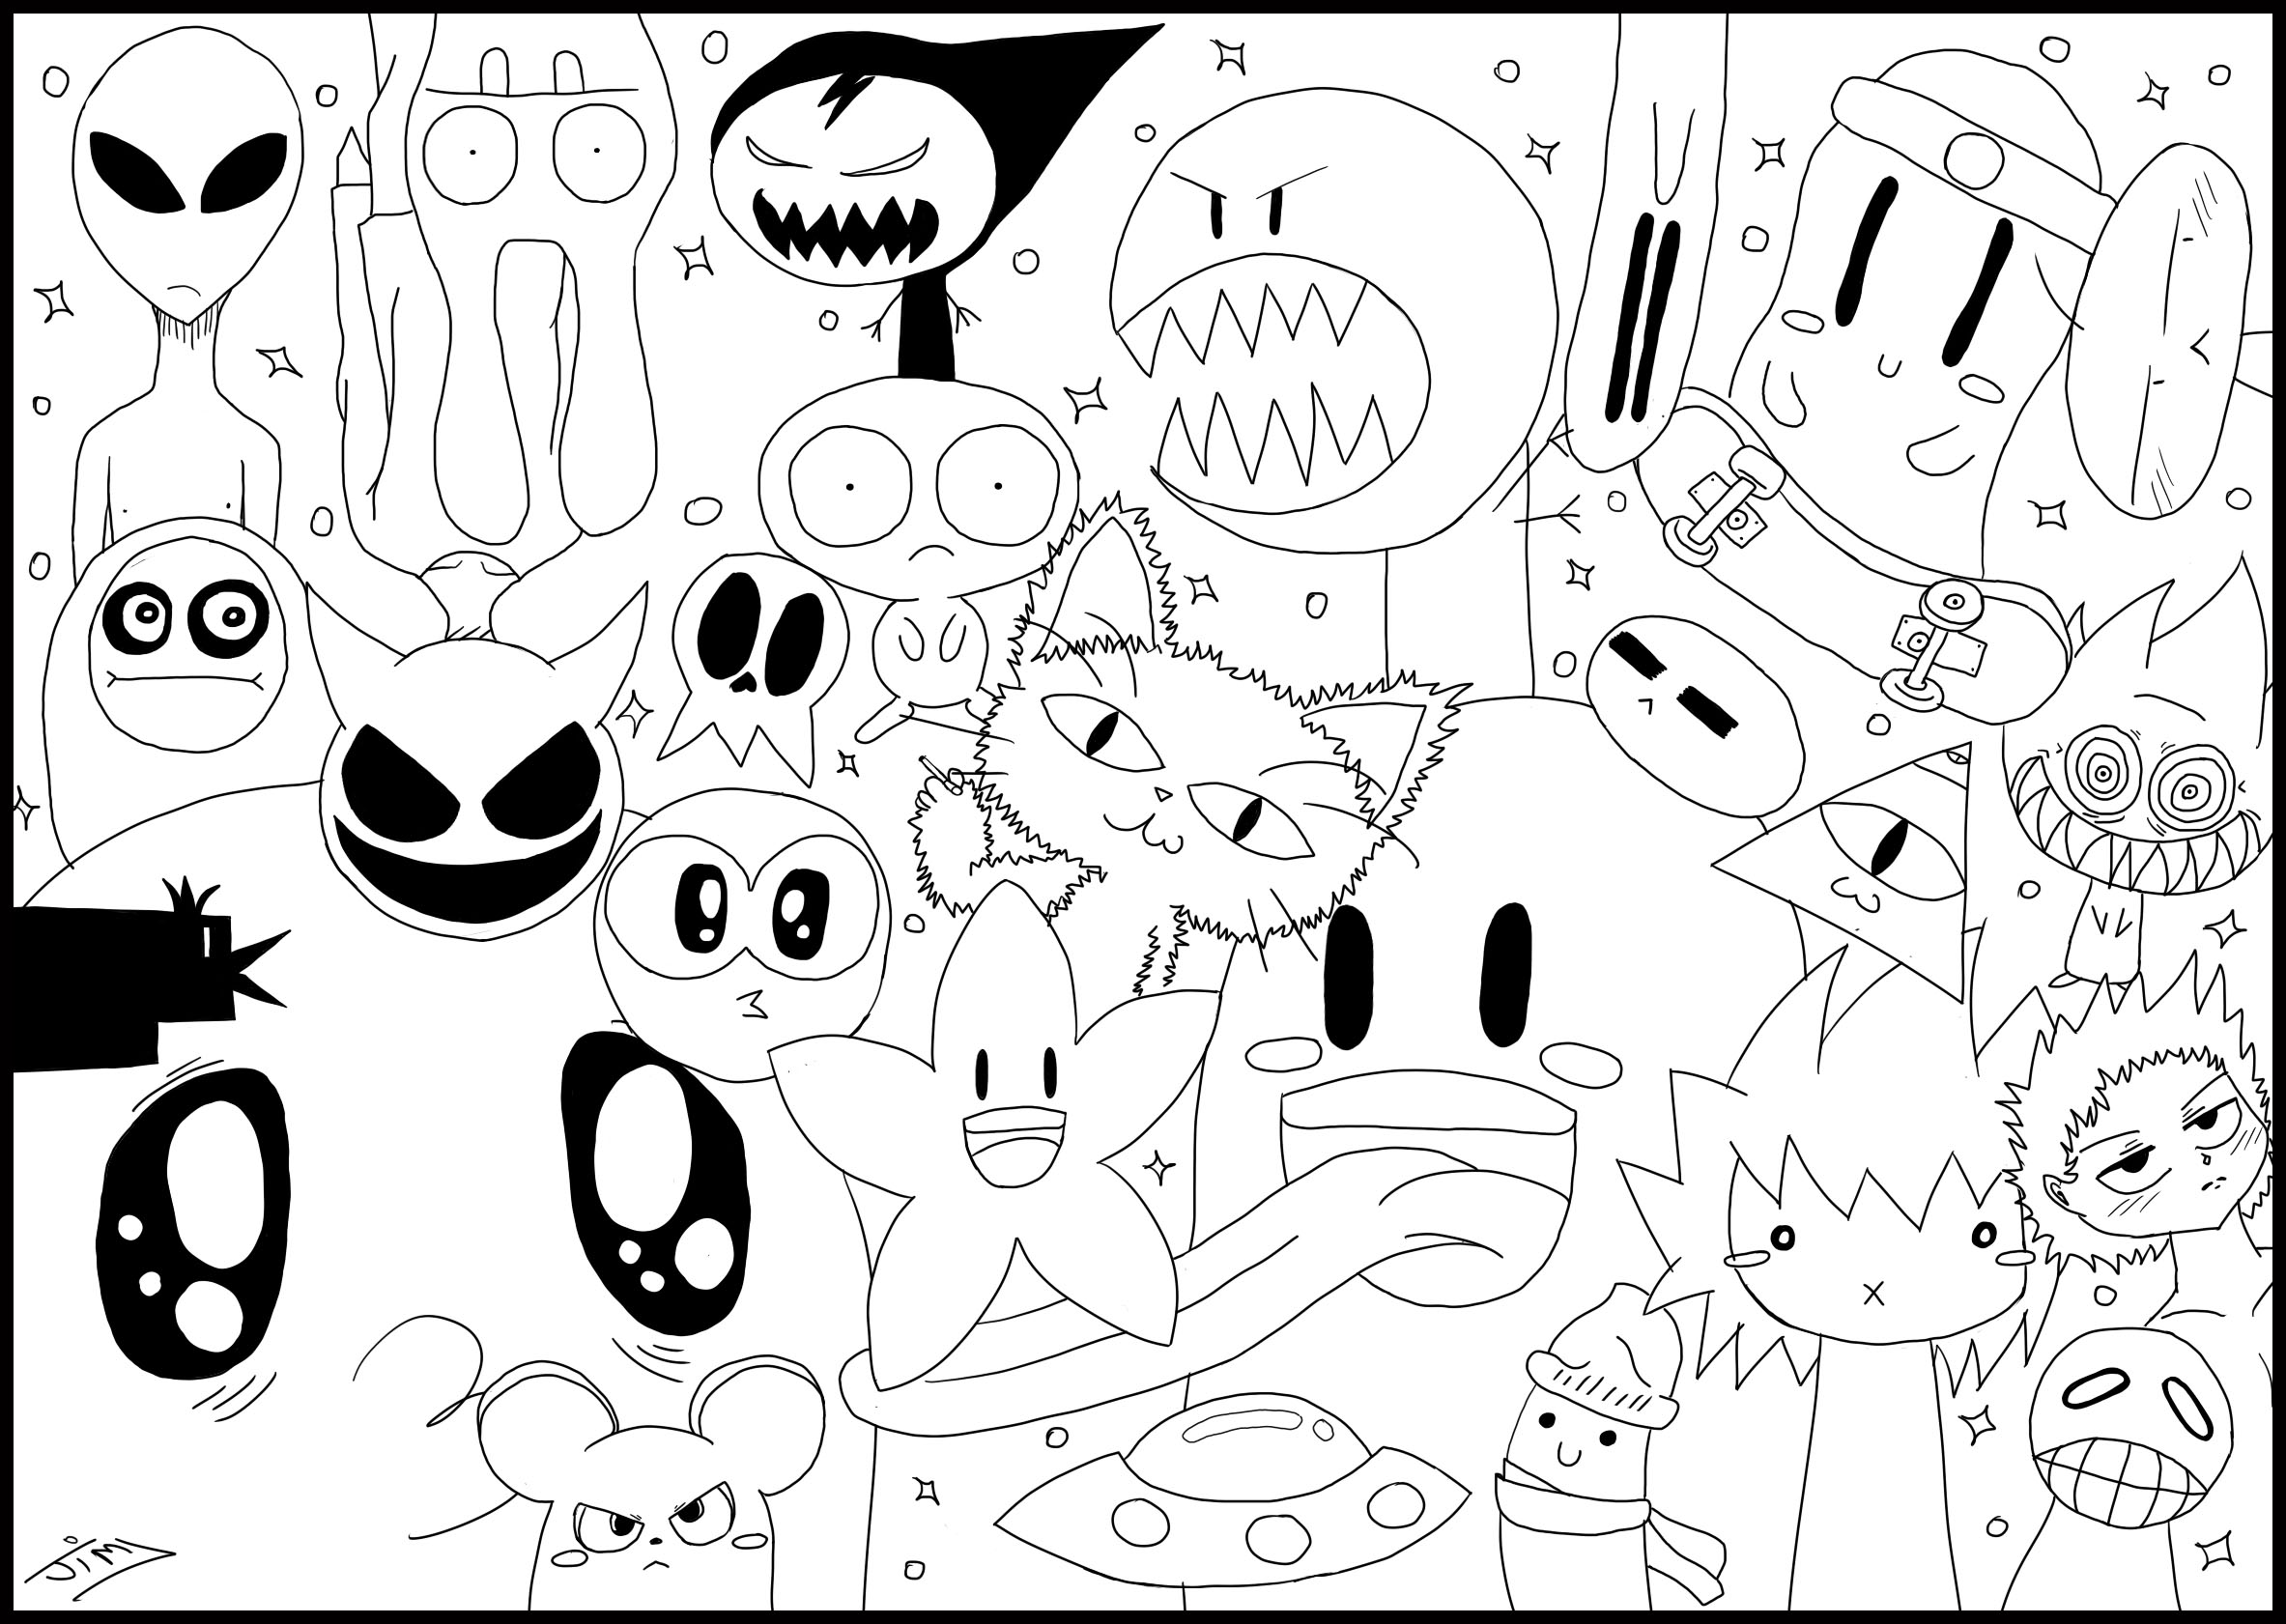 The world of monsters. Drawing of monsters and all kinds of animals, more or less funny or frightening, Artist : Ji. M